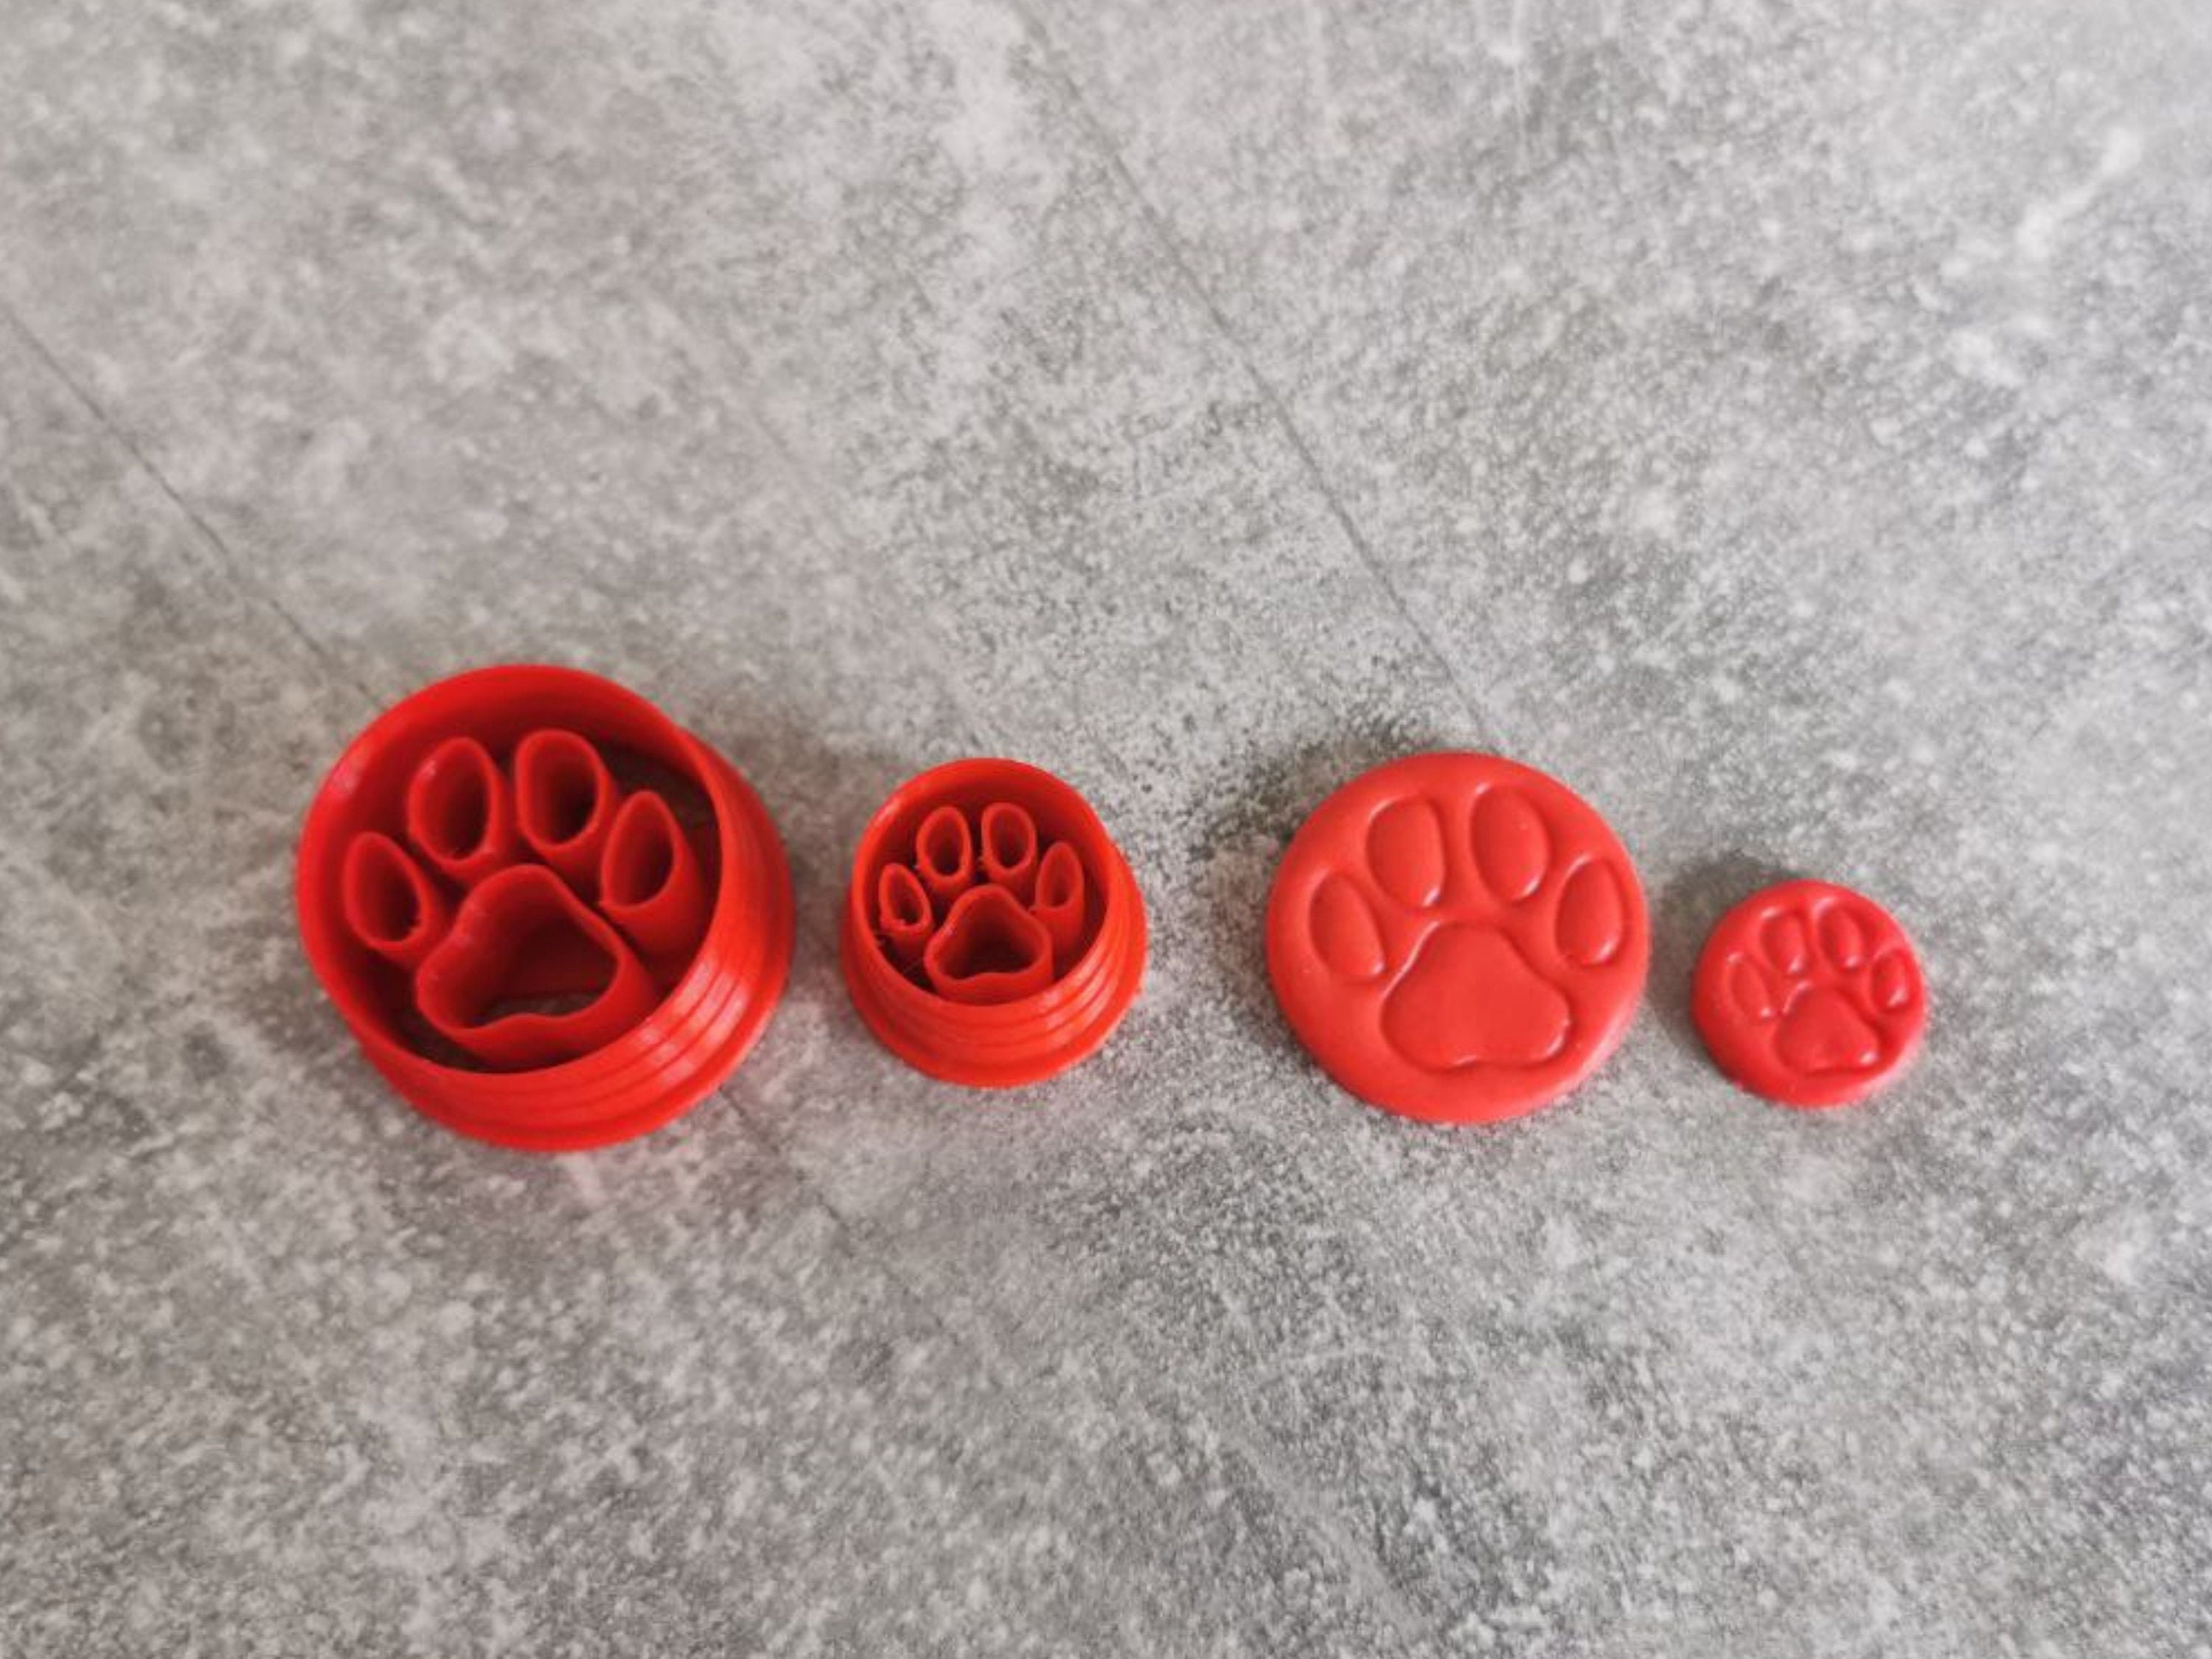 Pet Paw Print Stamp, Dog Paw Stamp, Cat Paw Stamp, Puppy Paw Stamp, Cat  Lover Gift, Animal Tracks Stamp, Cute Paw Print, Pets Gift 